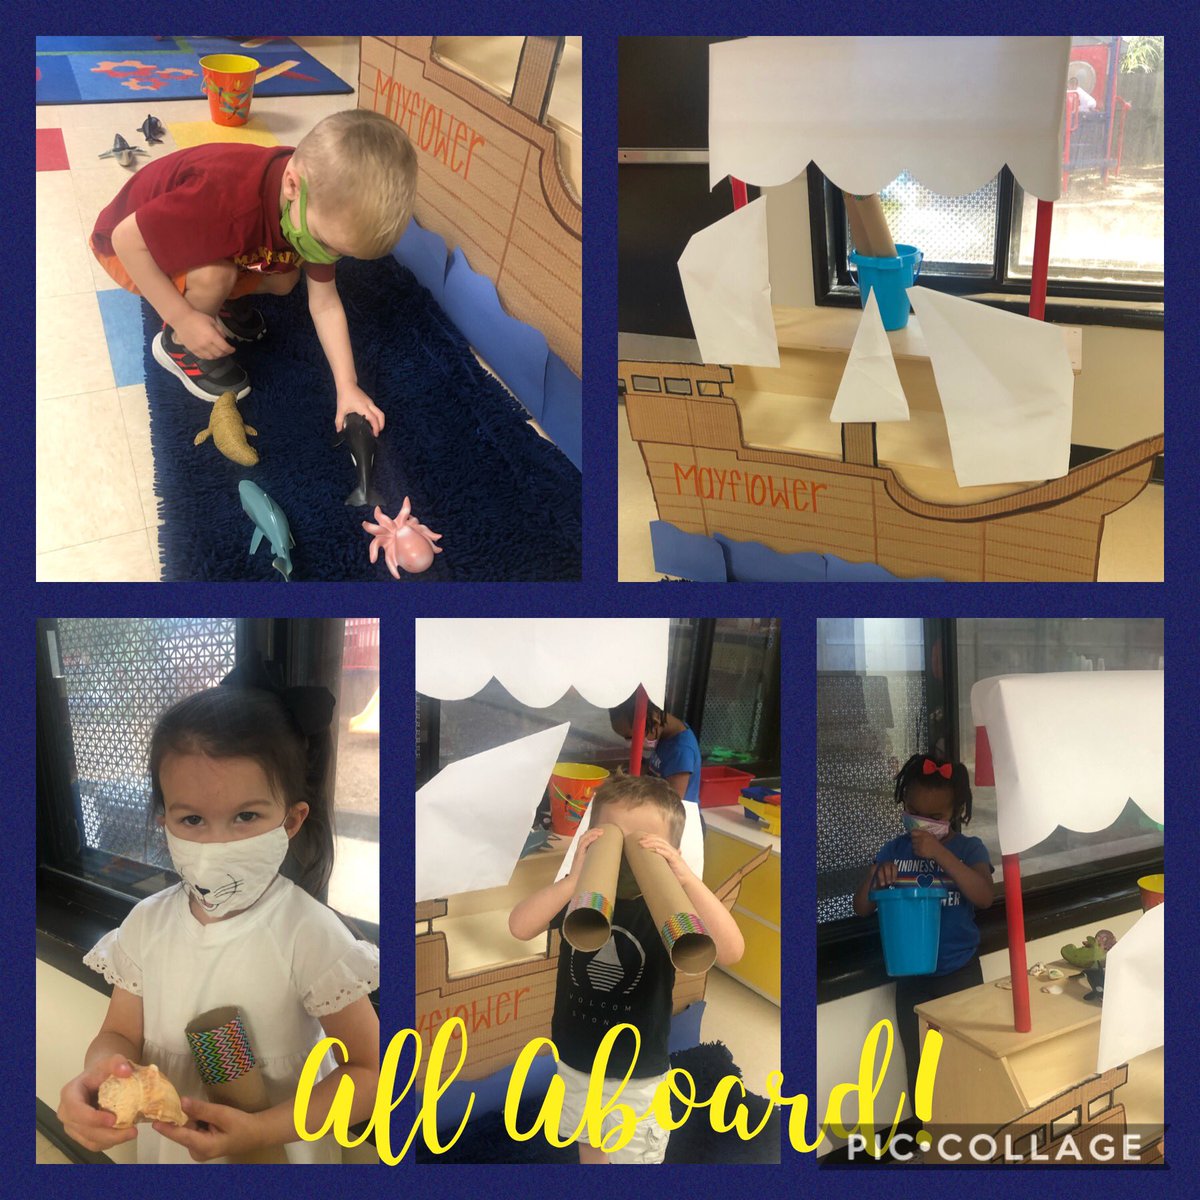 Our threes class set sail on the Mayflower. All aboard! @CFISDELCS #Thefirstthanksgiving #Plymothcolony #Sailaway